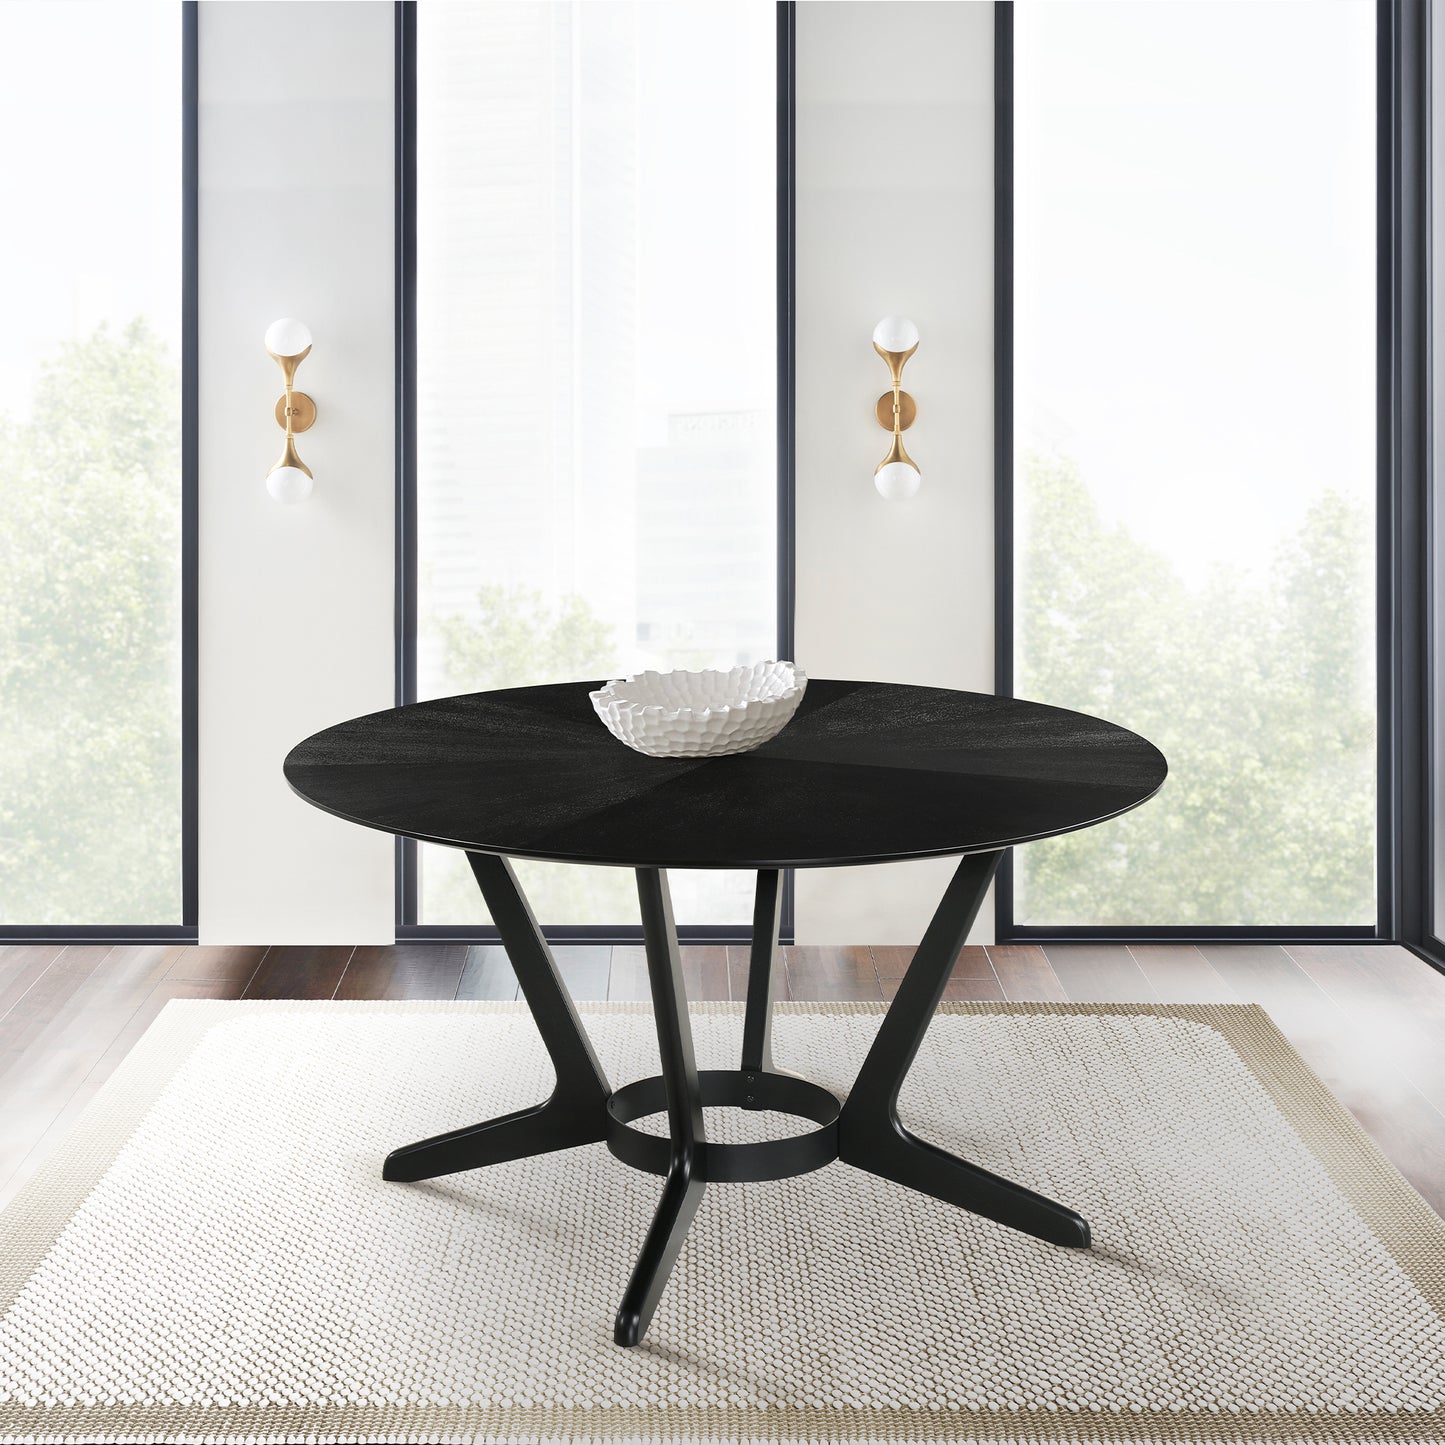 Santana Round Wood Dining Table in Black Finish